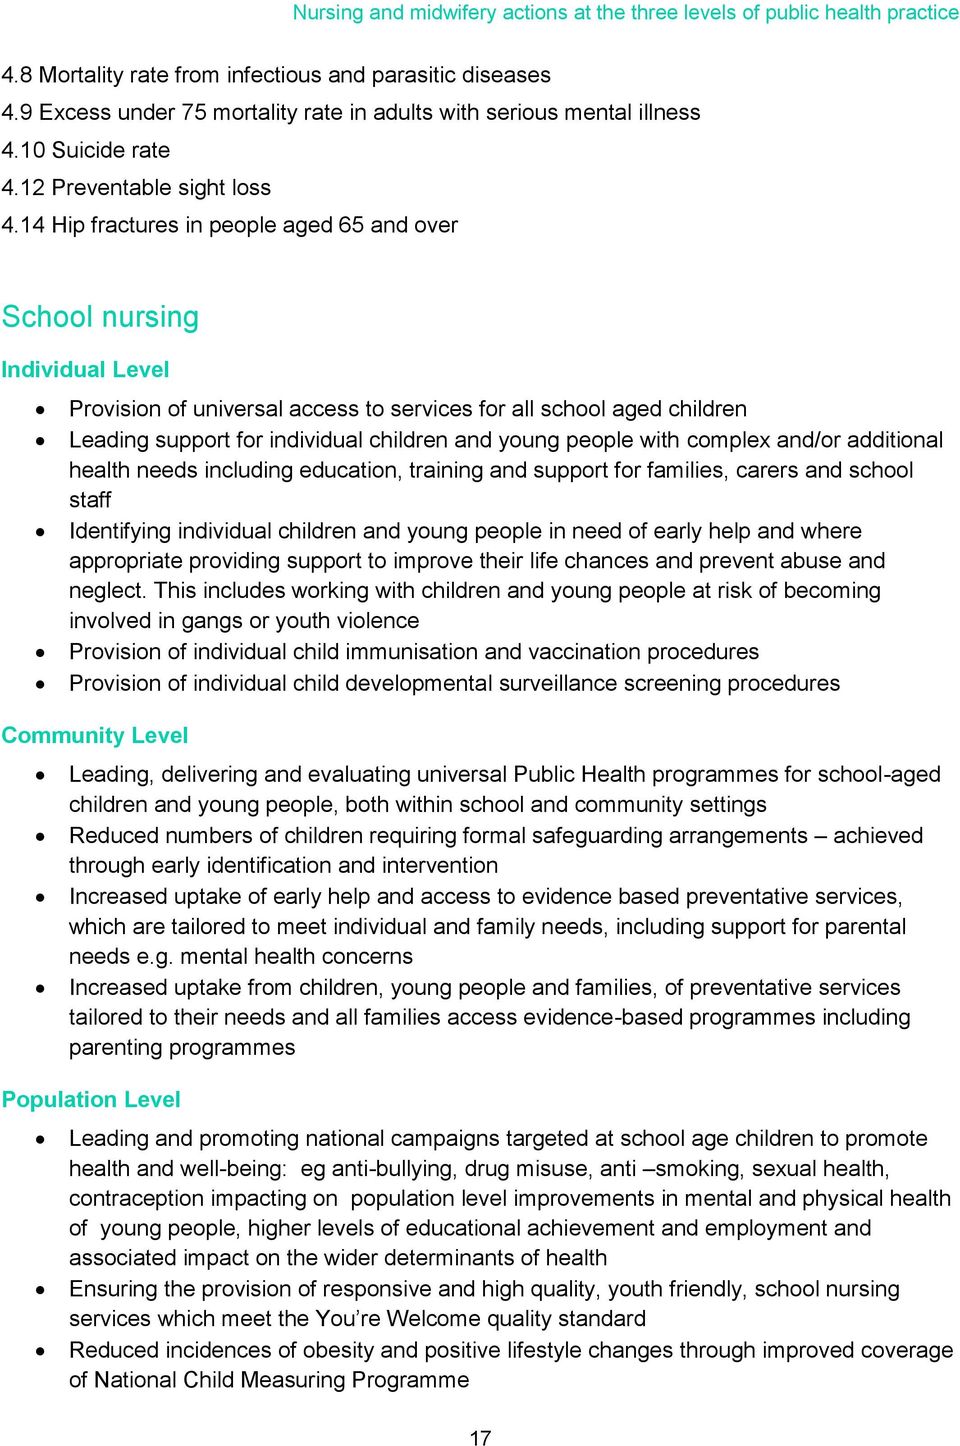 14 Hip fractures in people aged 65 and over School nursing Provision of universal access to services for all school aged children Leading support for individual children and young people with complex